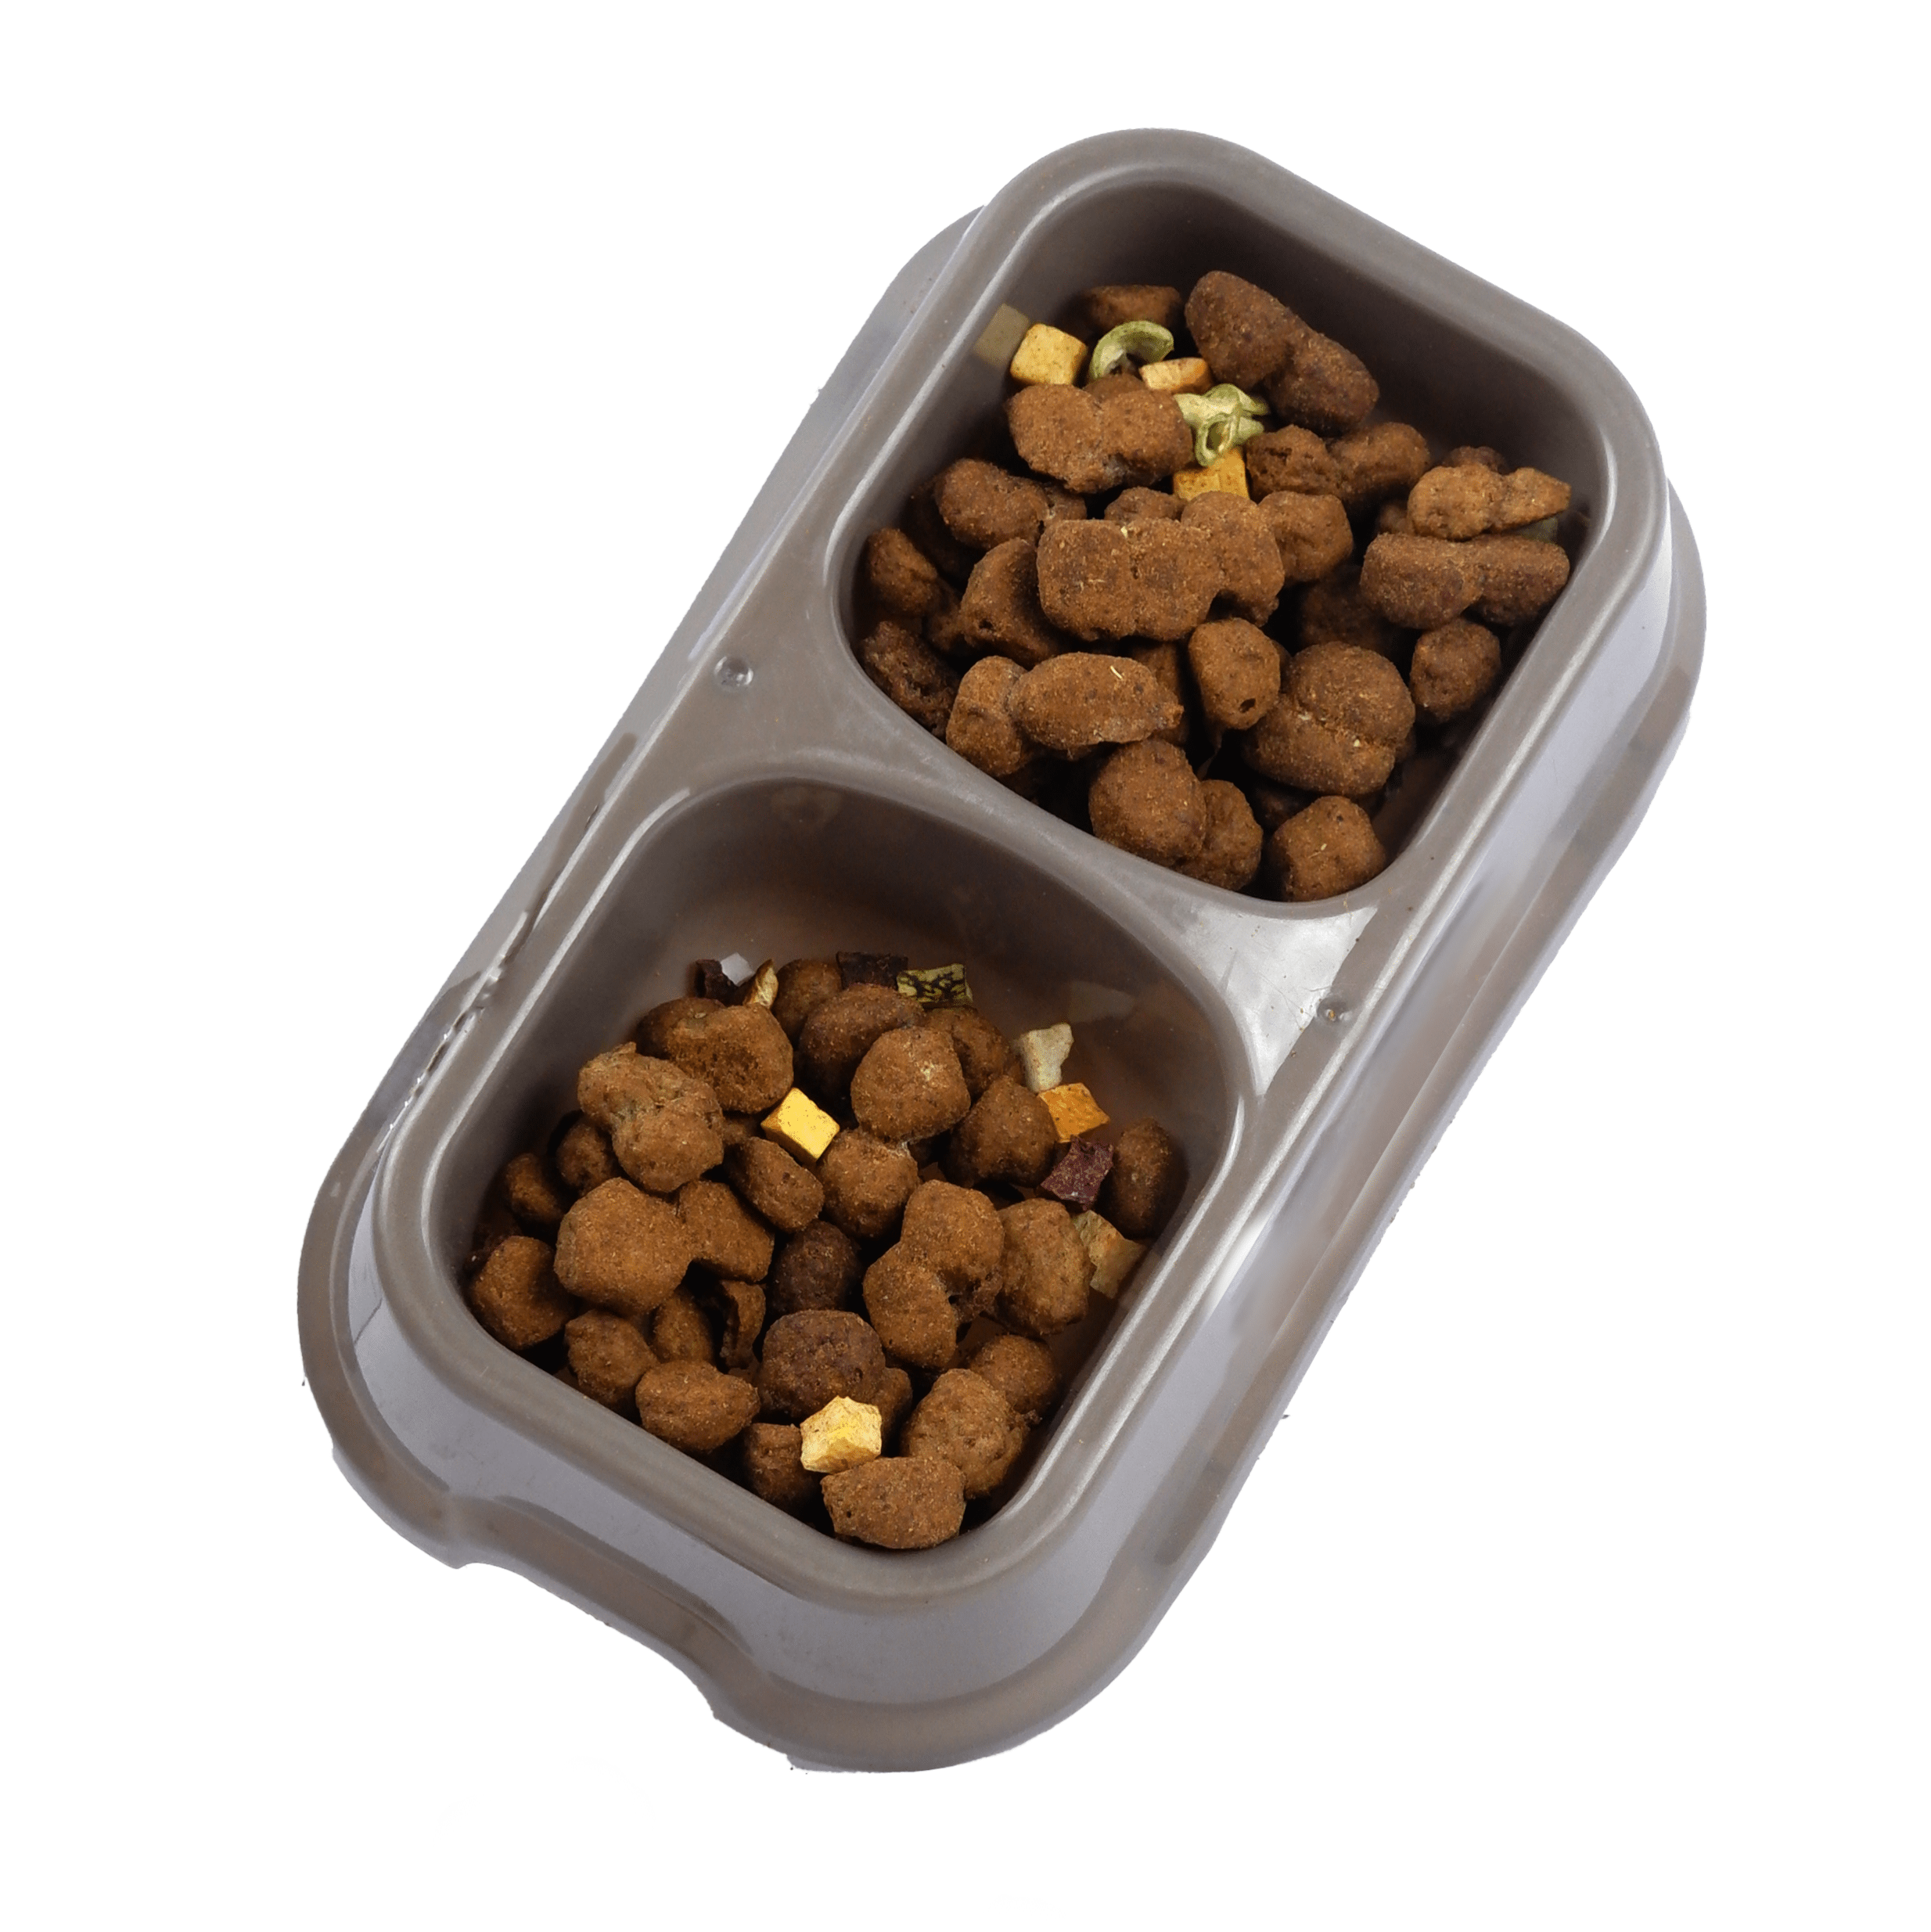 M Pets Plastic Double Bowl for Cats (Brown)